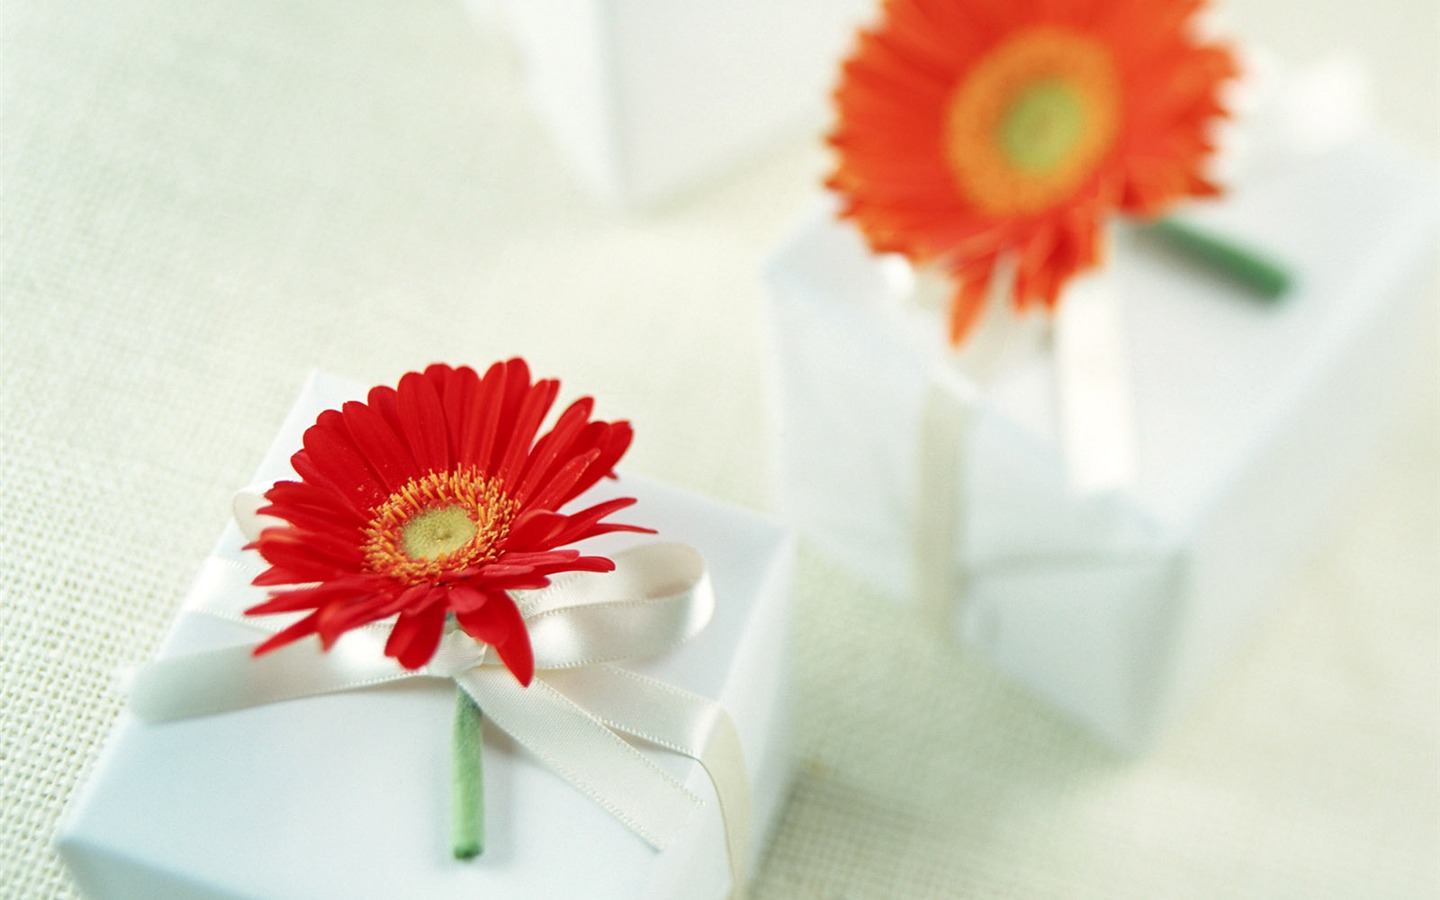 Flowers and gifts wallpaper (1) #18 - 1440x900